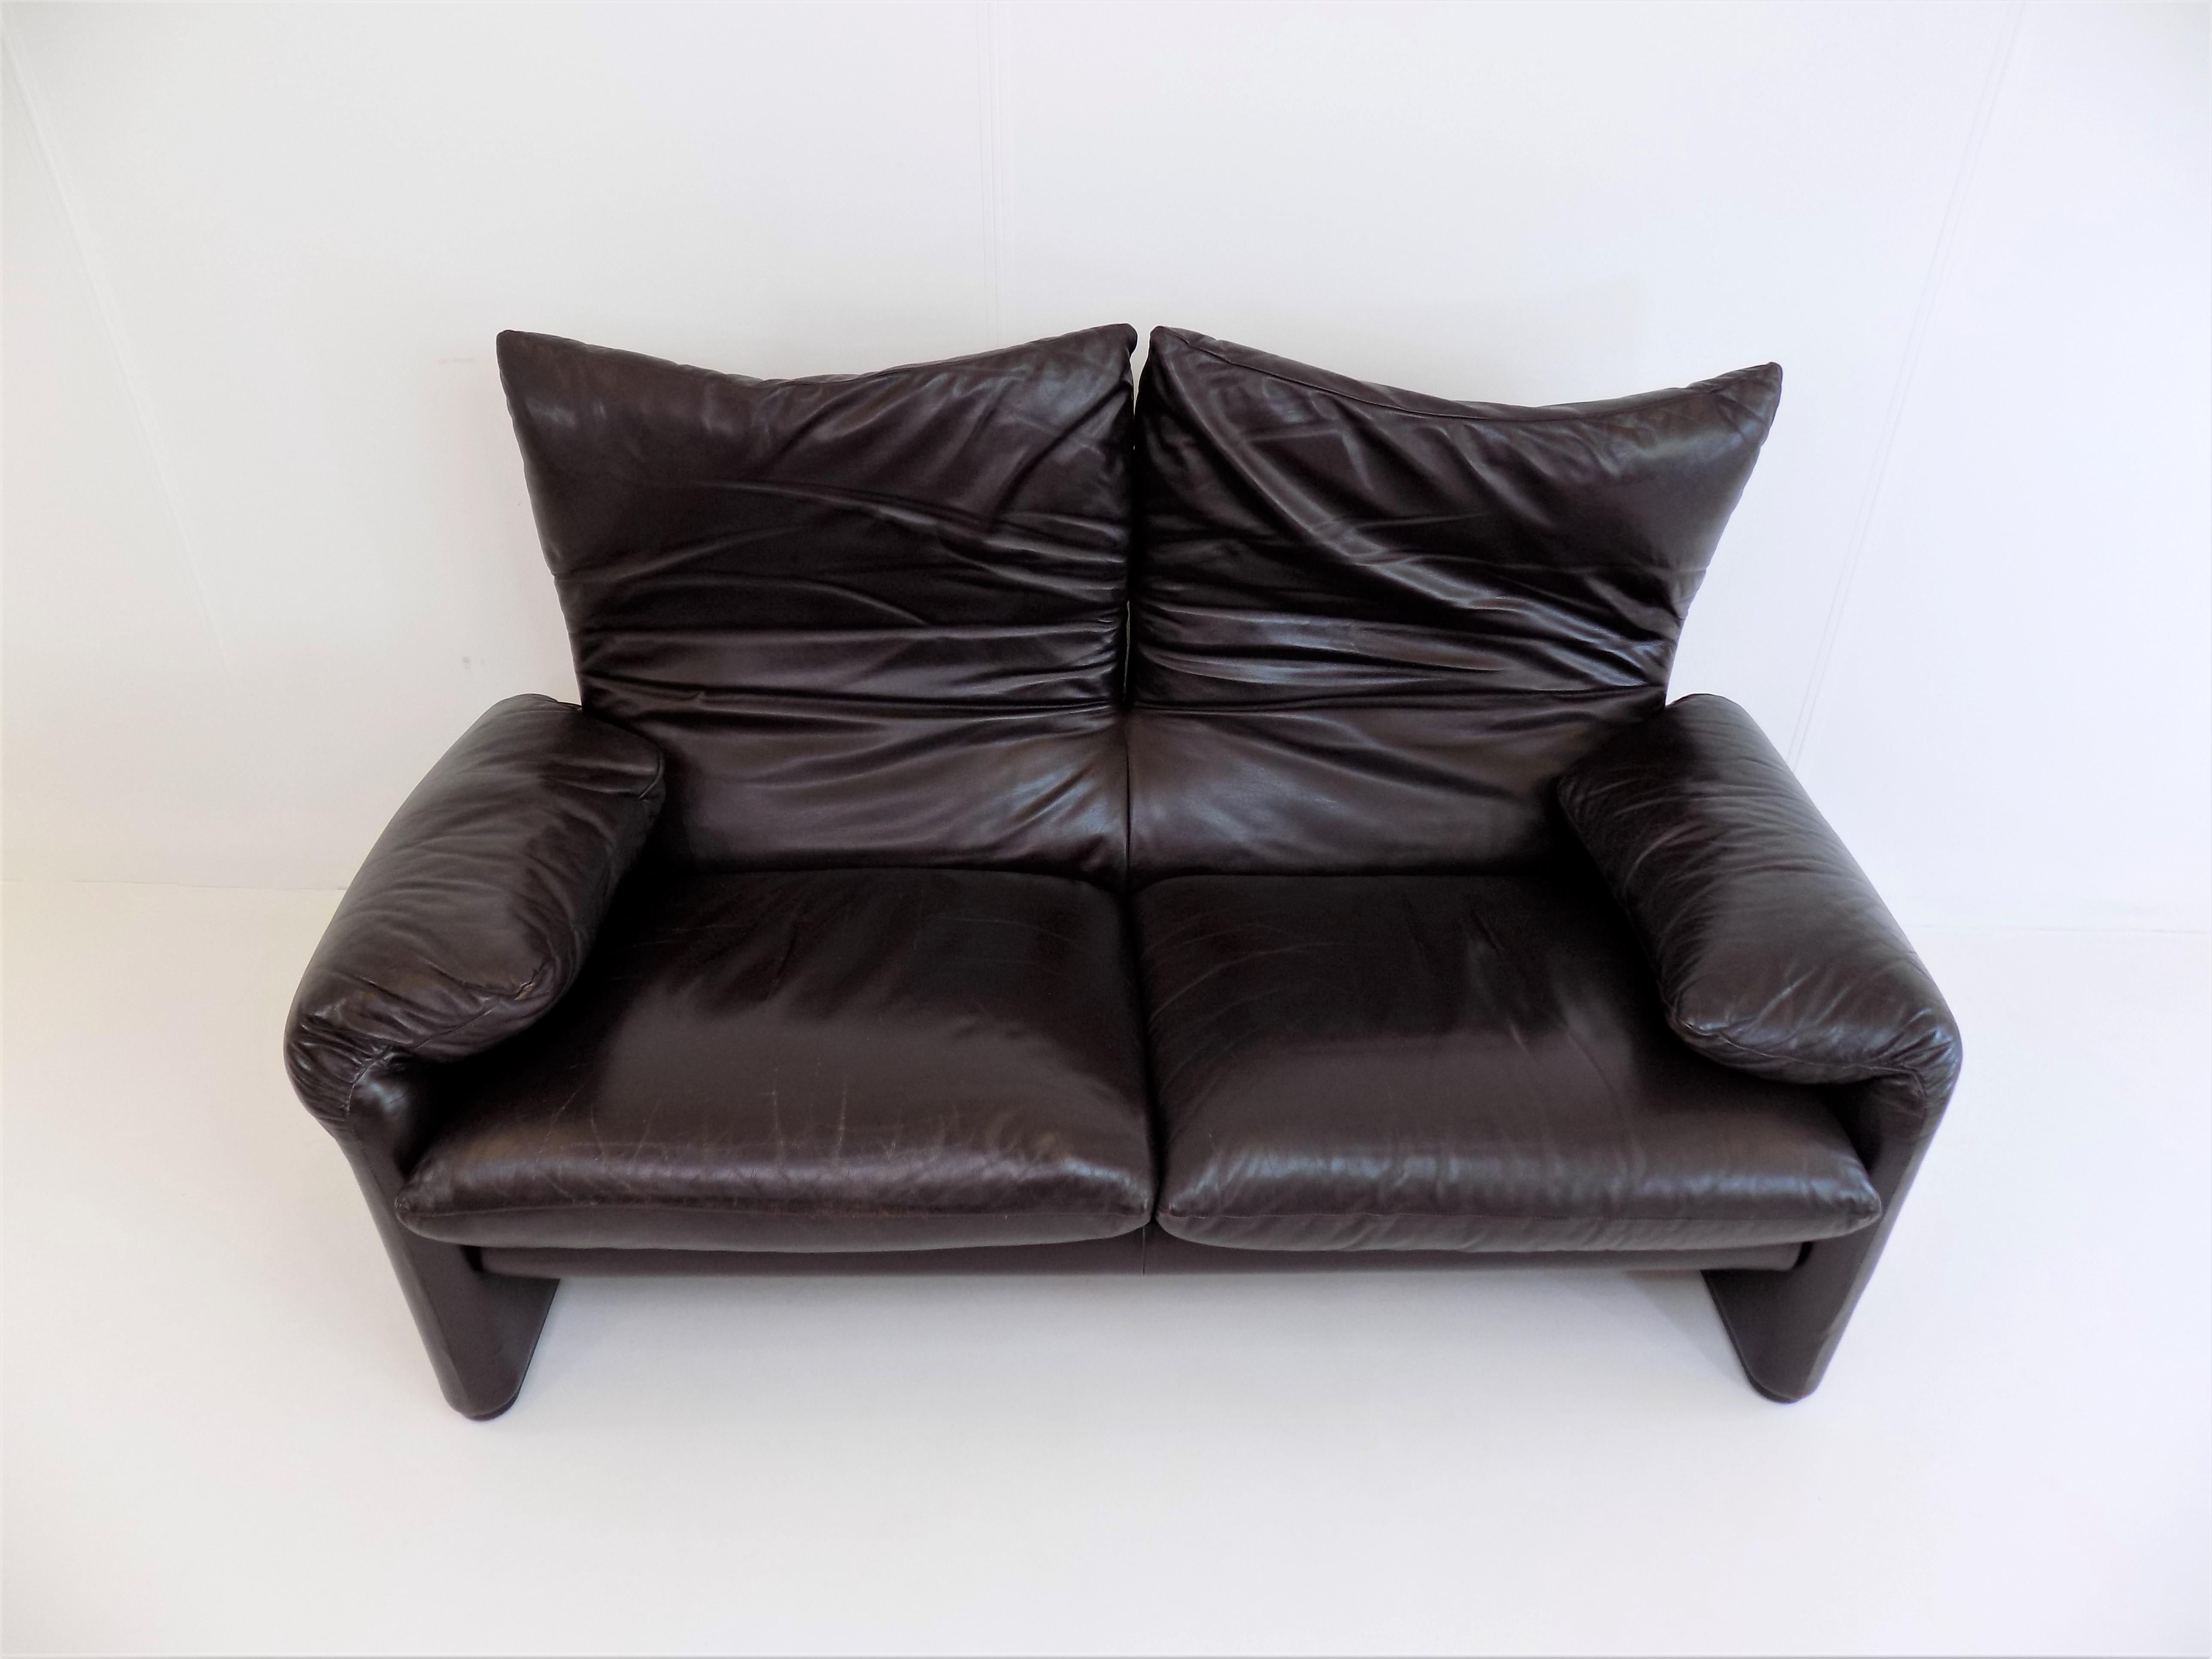 The Maralunga sofa is upholstered in a dark brown leather and is in very good condition. The leather is soft and only shows a slight age patina on one seat cushion. The joints of the backrests work smoothly and flawlessly. The upholstery offers a